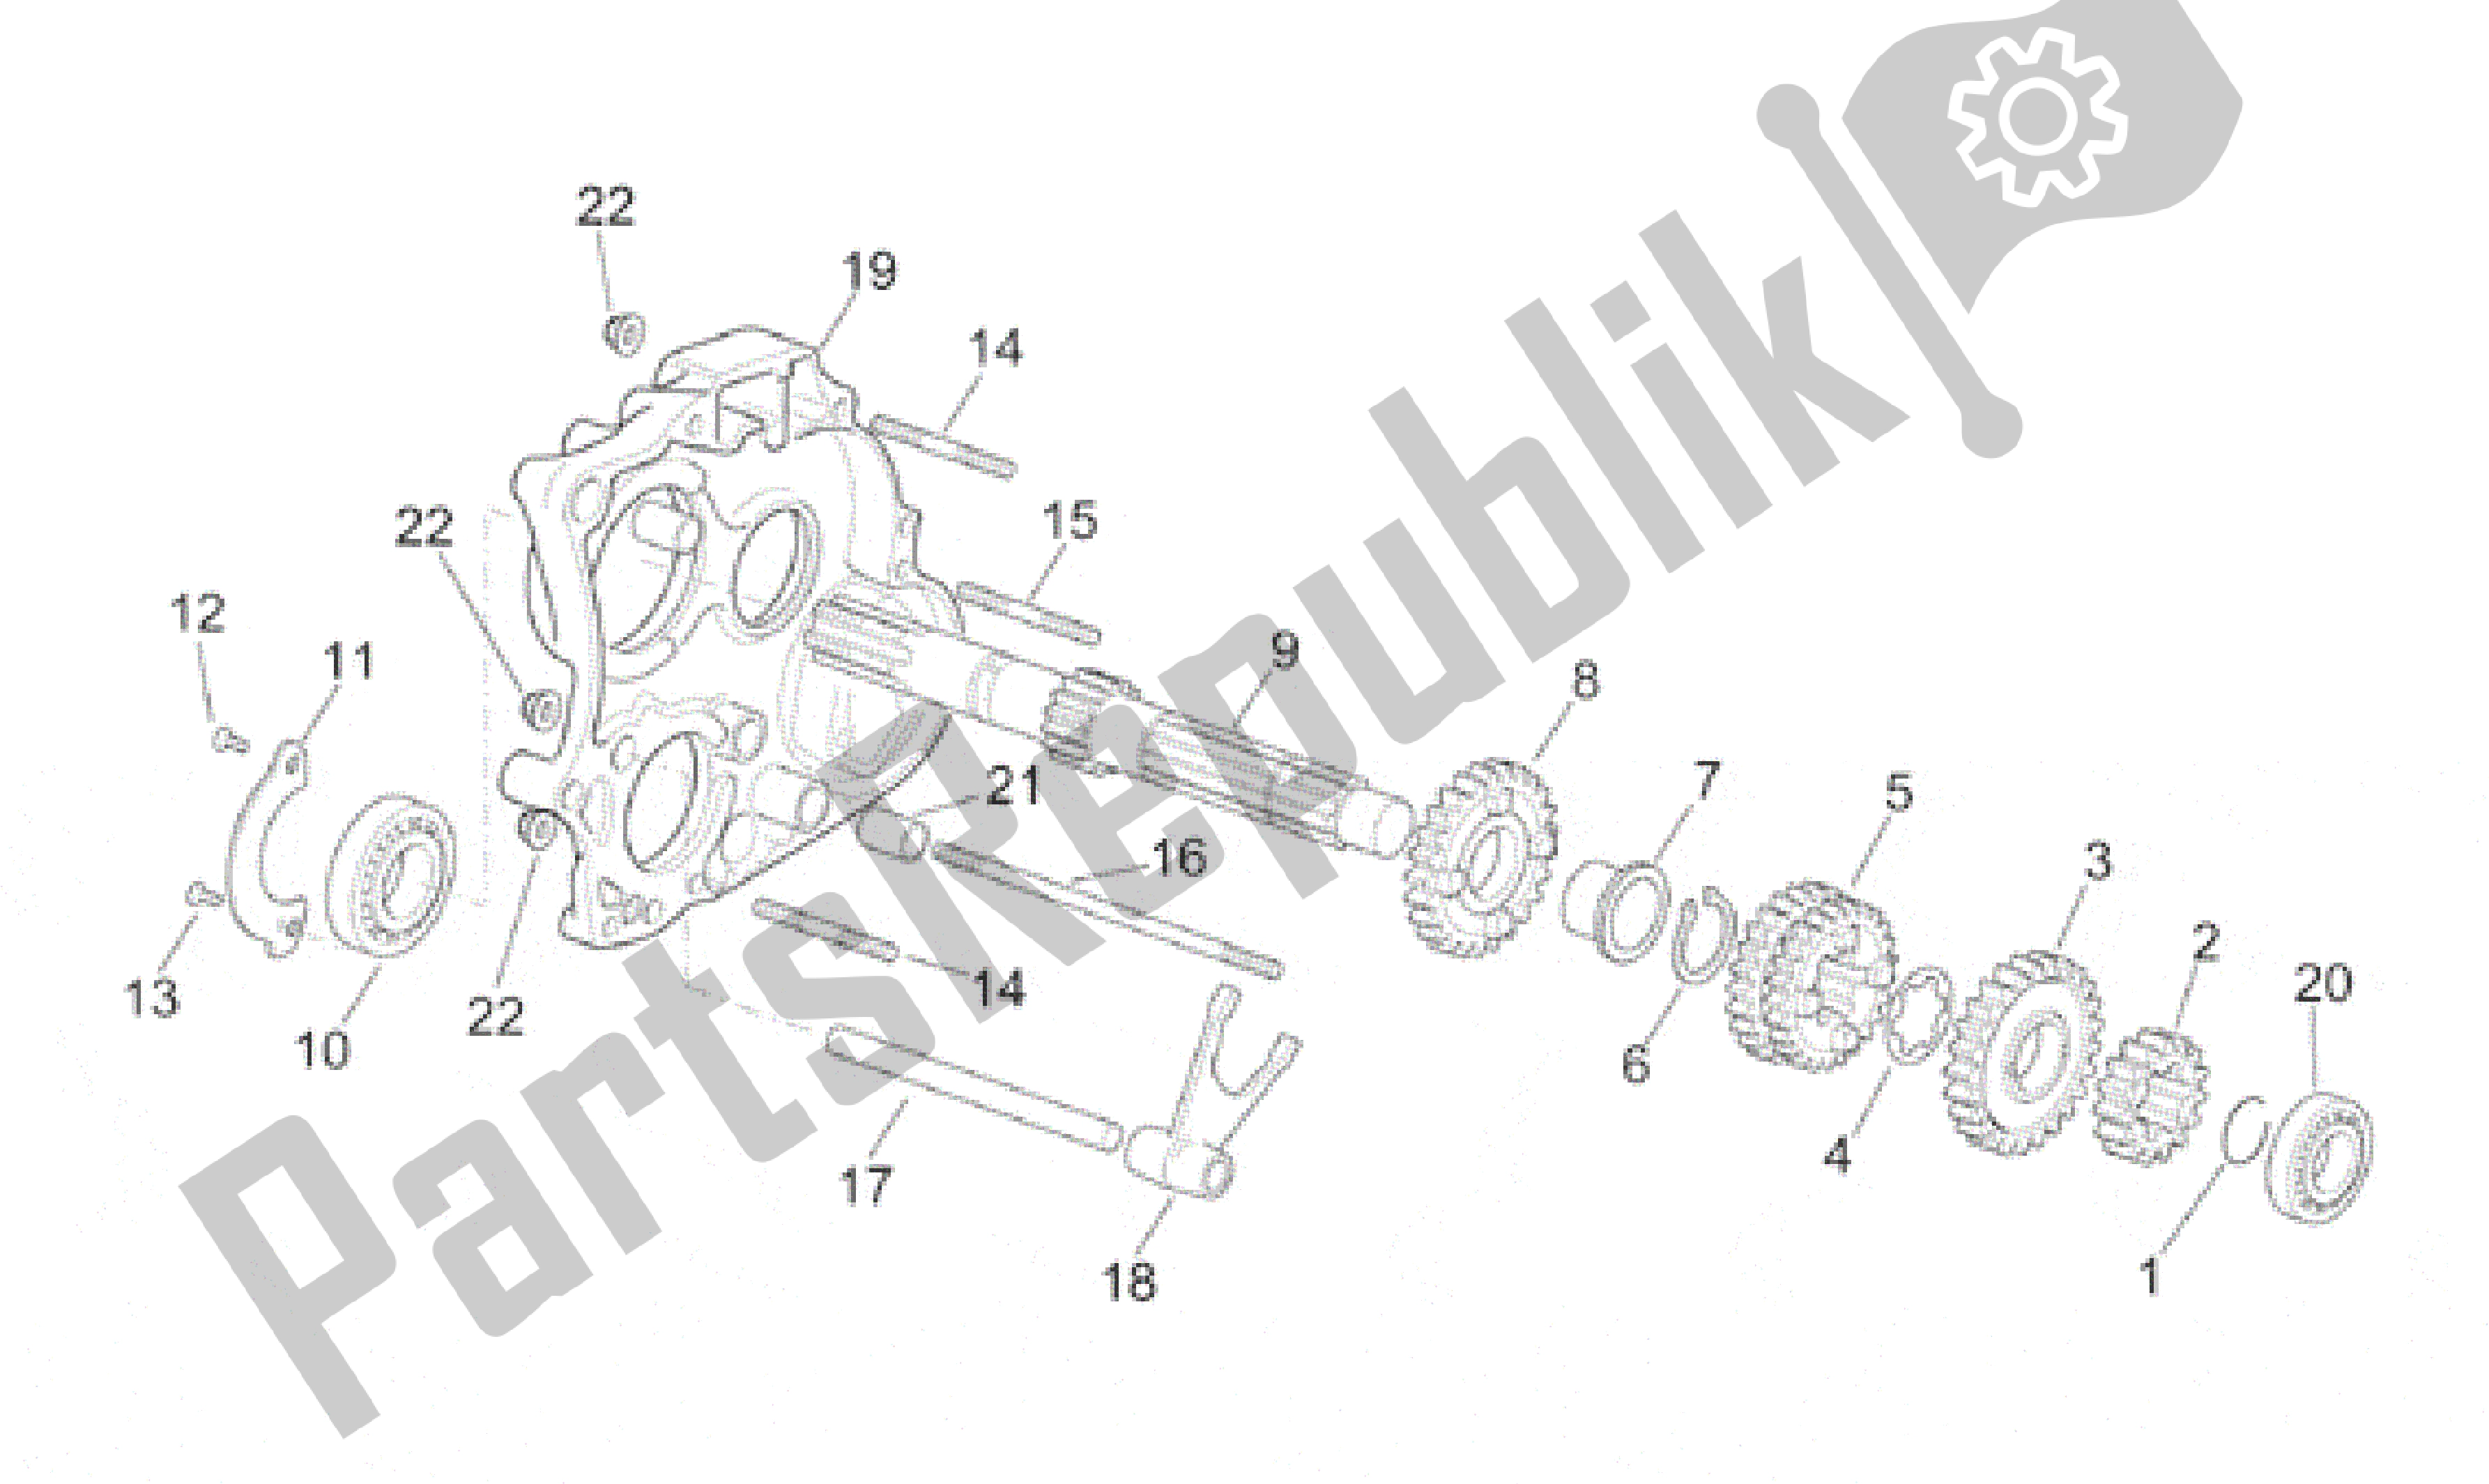 All parts for the Primary Gear Shaft of the Aprilia RS 250 1998 - 2001